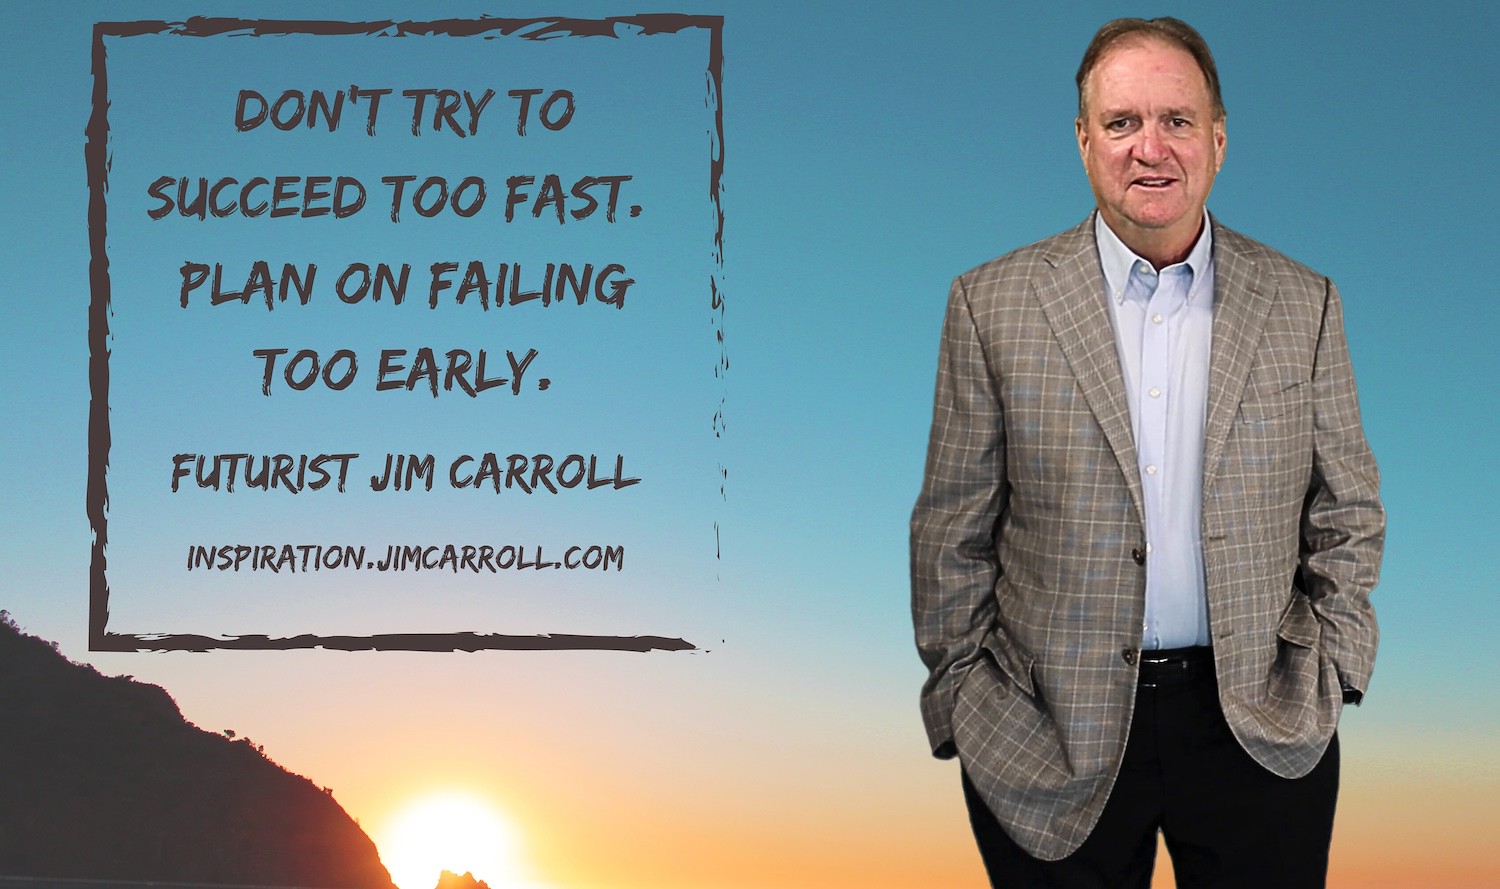 Daily Inspiration: "Don't try to succeed too fast. Plan on failing too early" - Futurist Jim Carroll